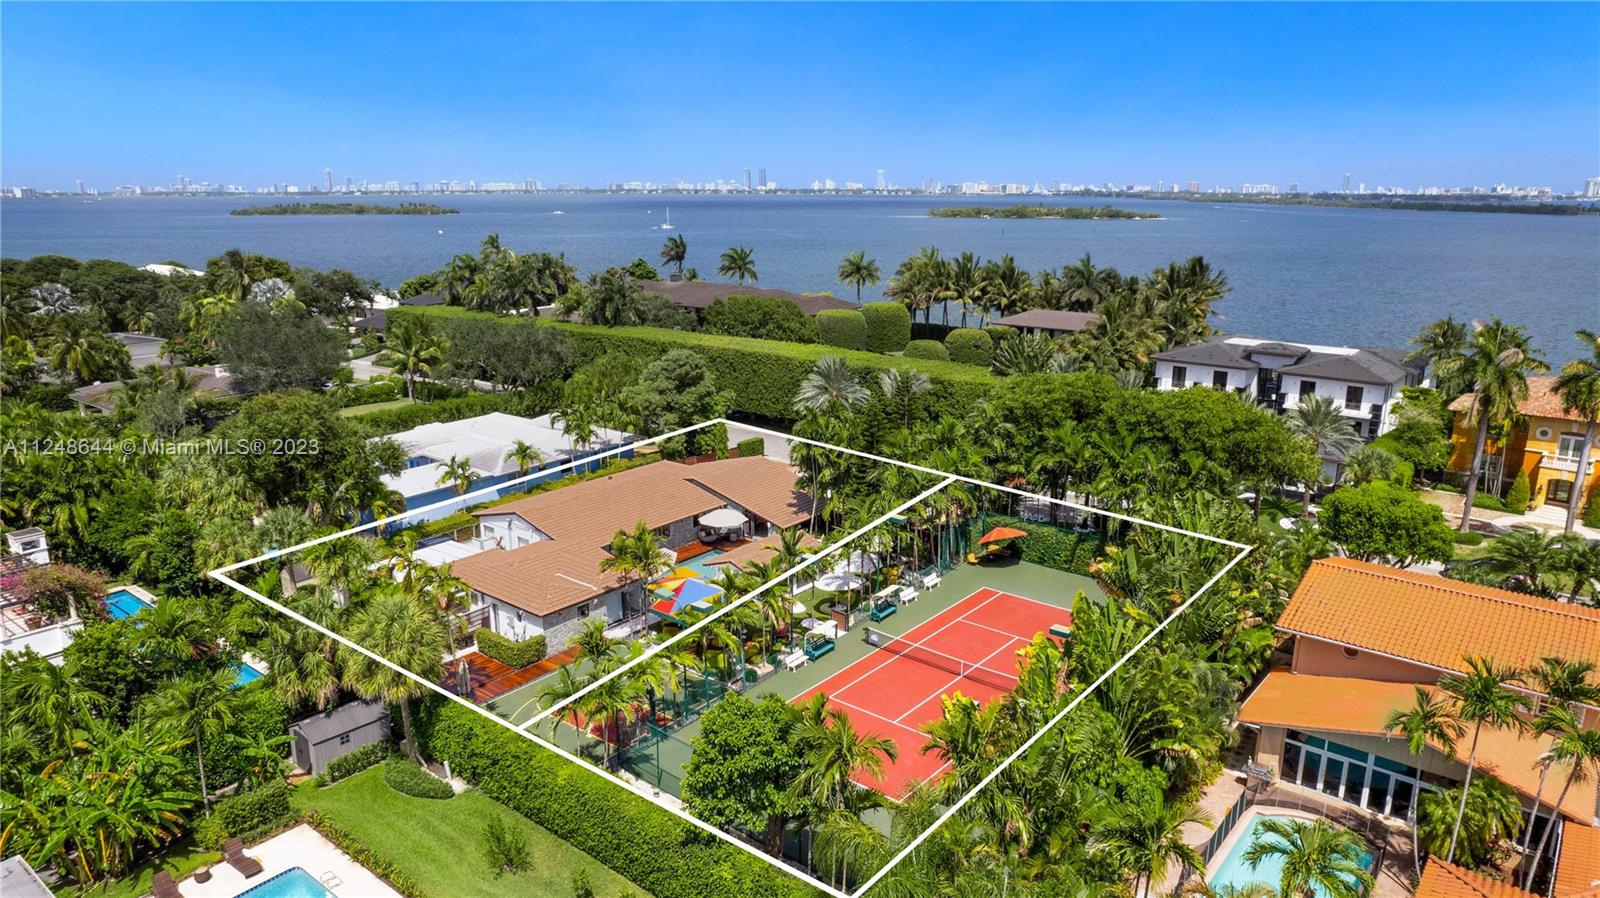 TWO LOTS! Unique opportunity to own two contiguous lot perfect to build two homes in the most premium location in the island of Bay Point.  CASA CLUB. Enjoy this tropical paradise perfect to live and entertain at the exclusive island of Bay Point, the only true gated private community in the east of Miami with the most amazing outdoor living with your private Tennis court, basketball court, mini golf, billiard room, and gym in this charming double lot, fully renovated, 5 bedroom, 4 bathroom, modern ranch home. All new: roof, impact windows, modern kitchen with stainless steel appliances.  Guest quarter with morning bar and gym. Just 10 min from Miami Beach and MIA. Next to Design District, Midtown, Wynwood. Private financing available.